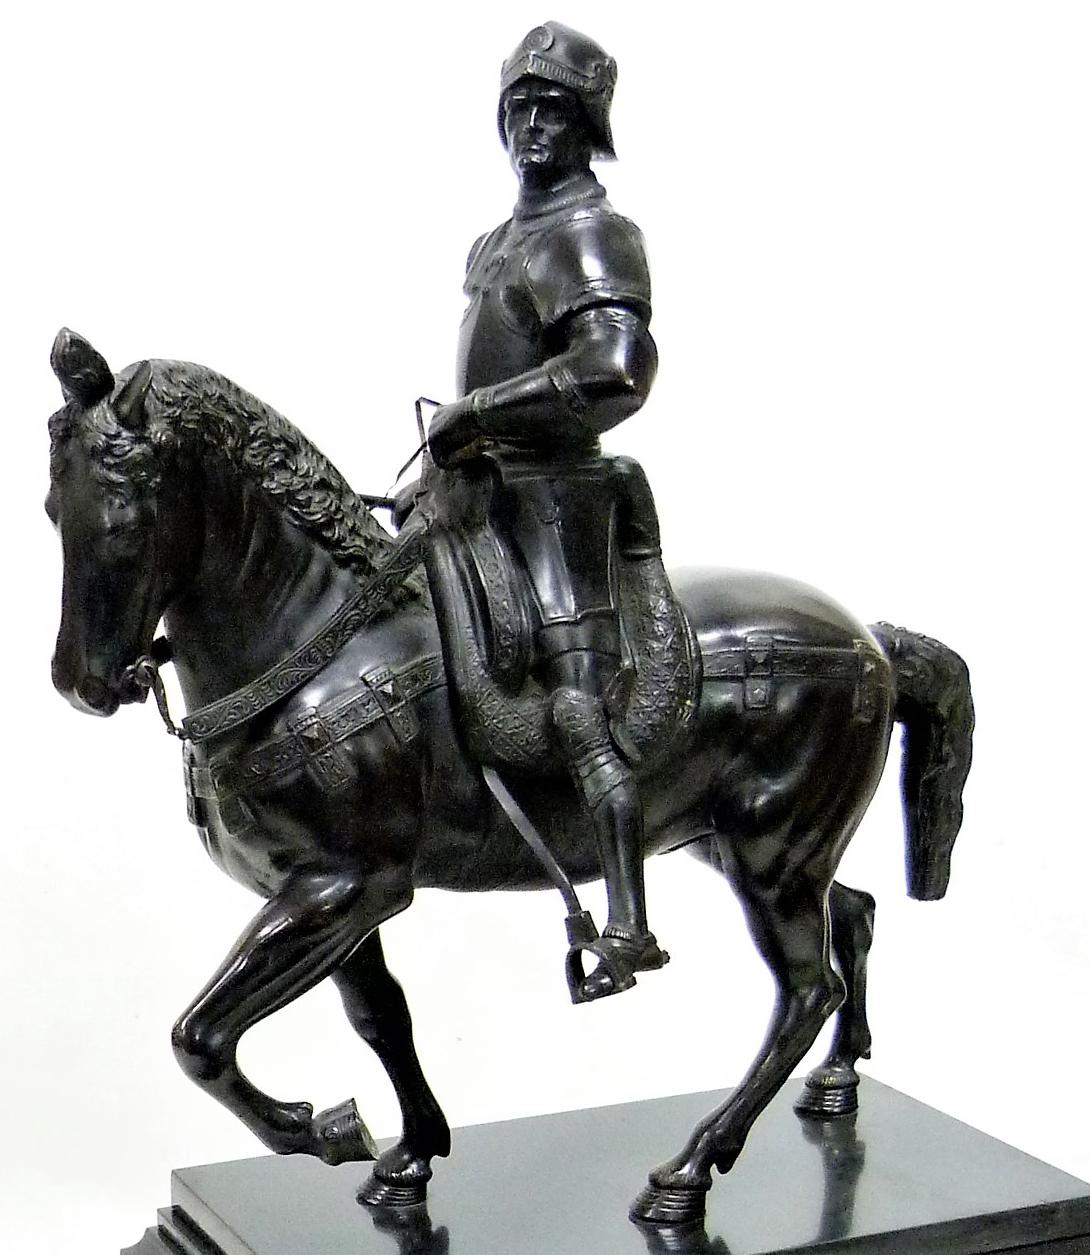 Large bronze equestrian statue with brown patina, finely chiselled with a tense and majestic appearance, picturing the condottiere Bartolomeo Colleoni. This bronze sculpture of very high quality is an old cast dating from the late nineteenth century